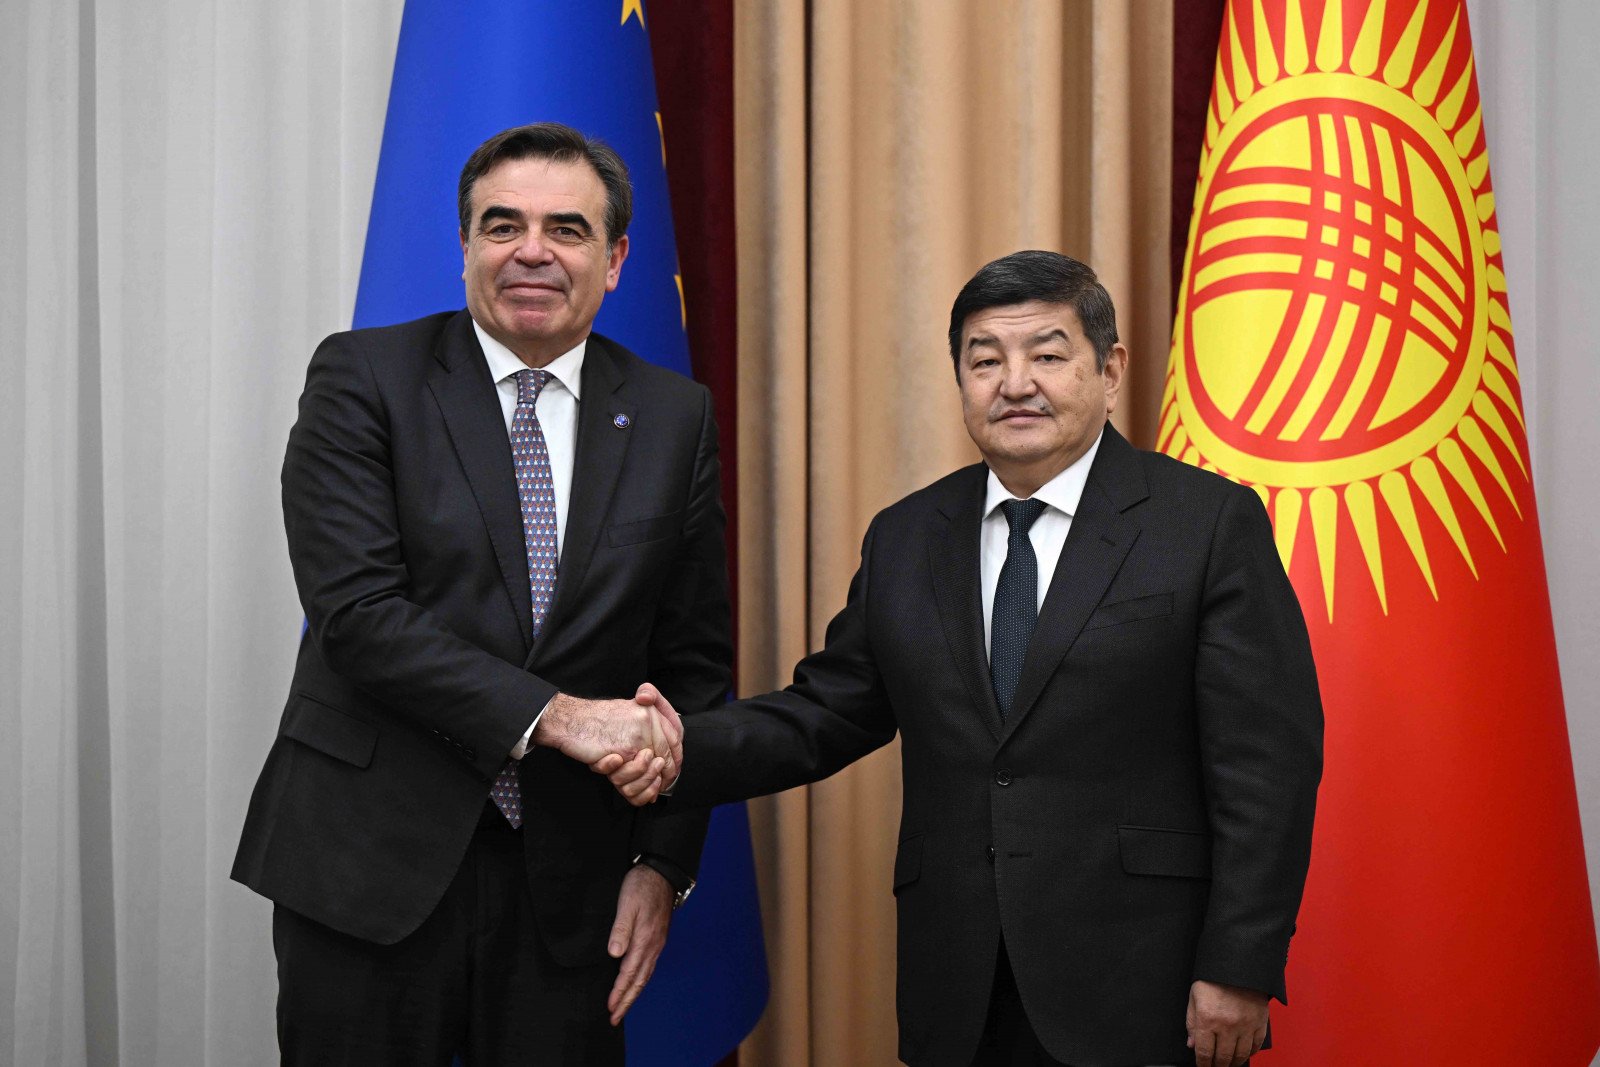 Kyrgyzstan stresses country's key role as bridge between Europe and Asia